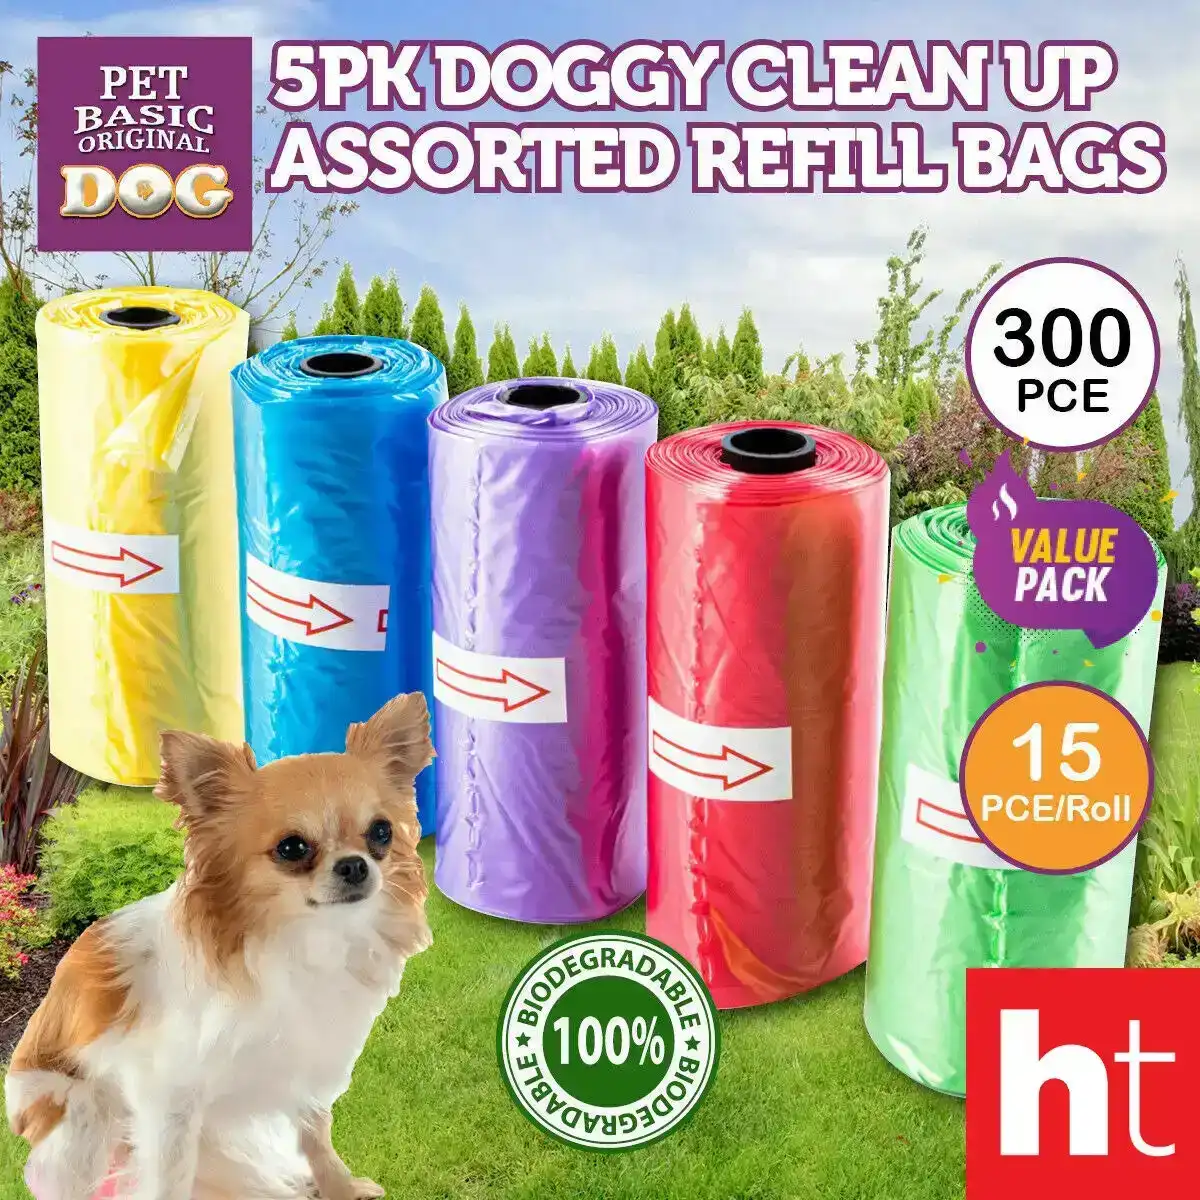 Pet Basic 300PCE Pet Waste Clean Up Refill Bags 100% Biodegradable